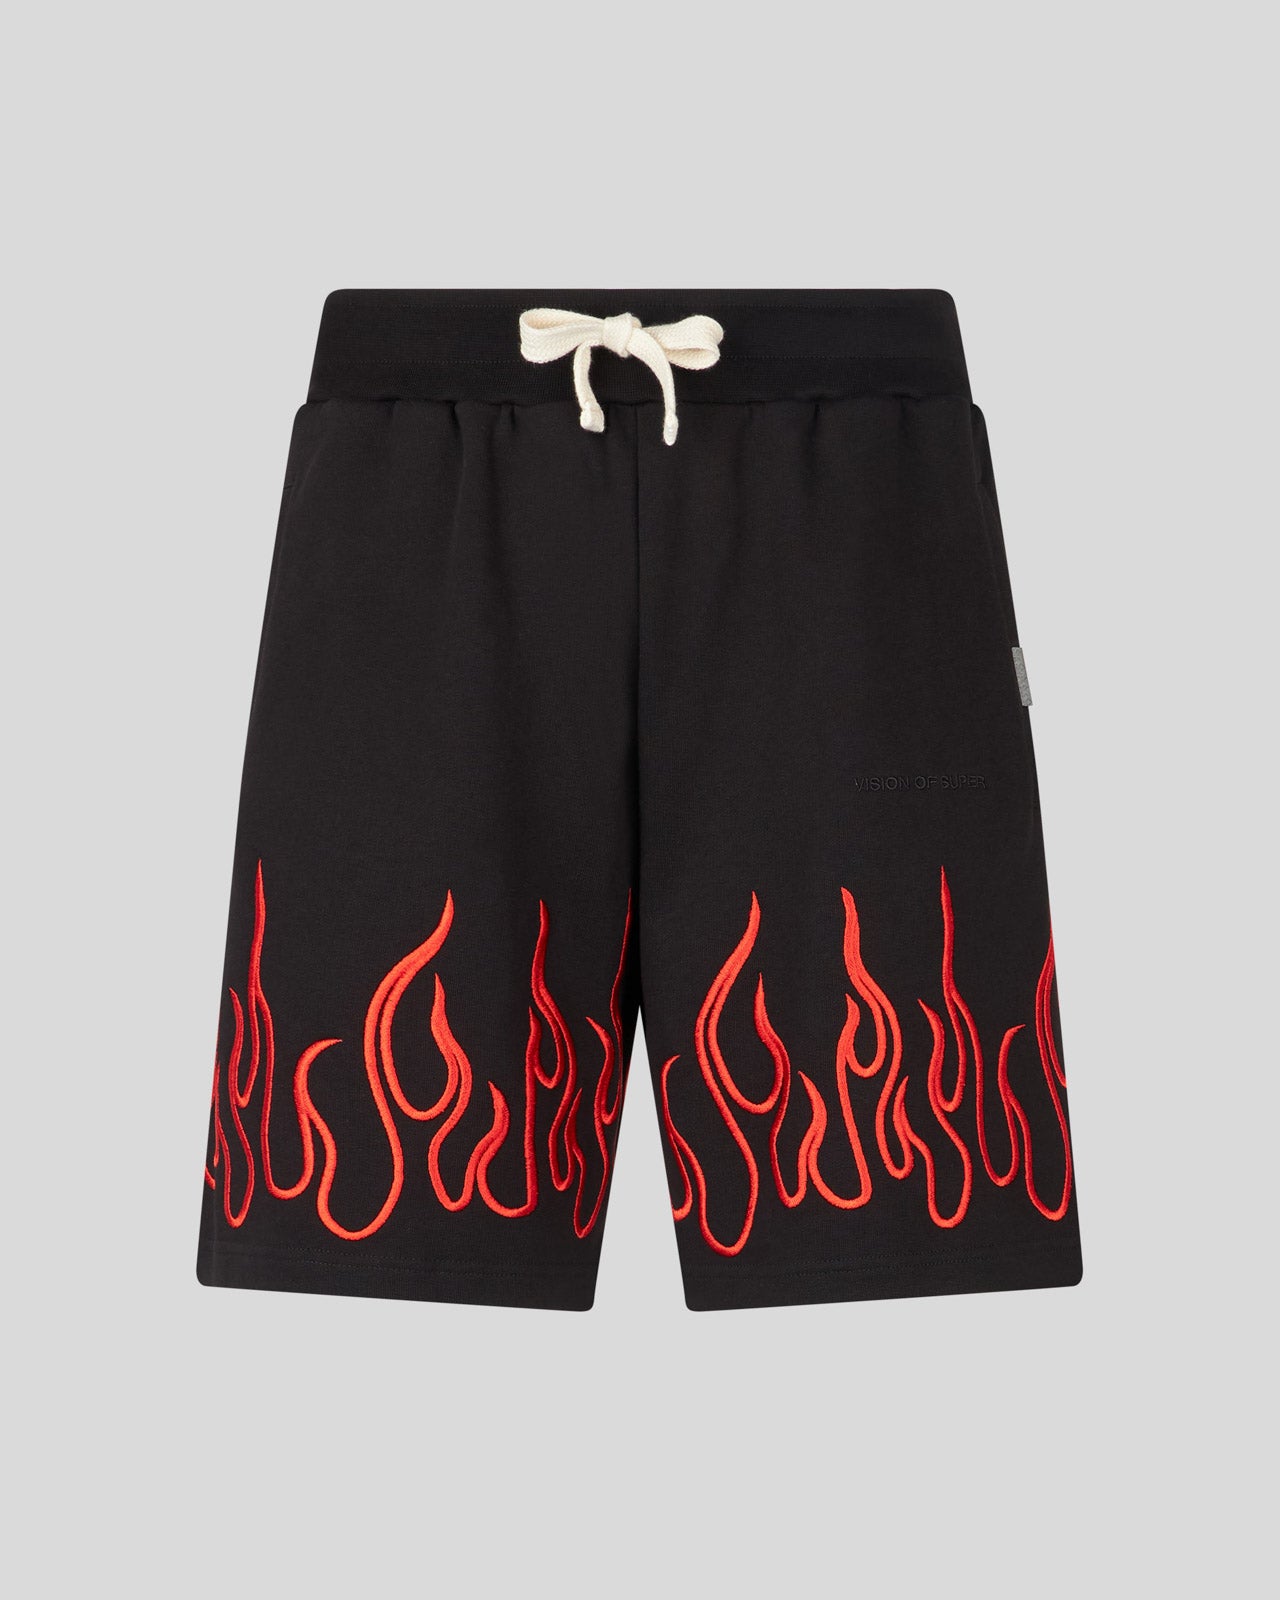 BLACK SHORTS WITH EMBROIDERED RED FLAMES